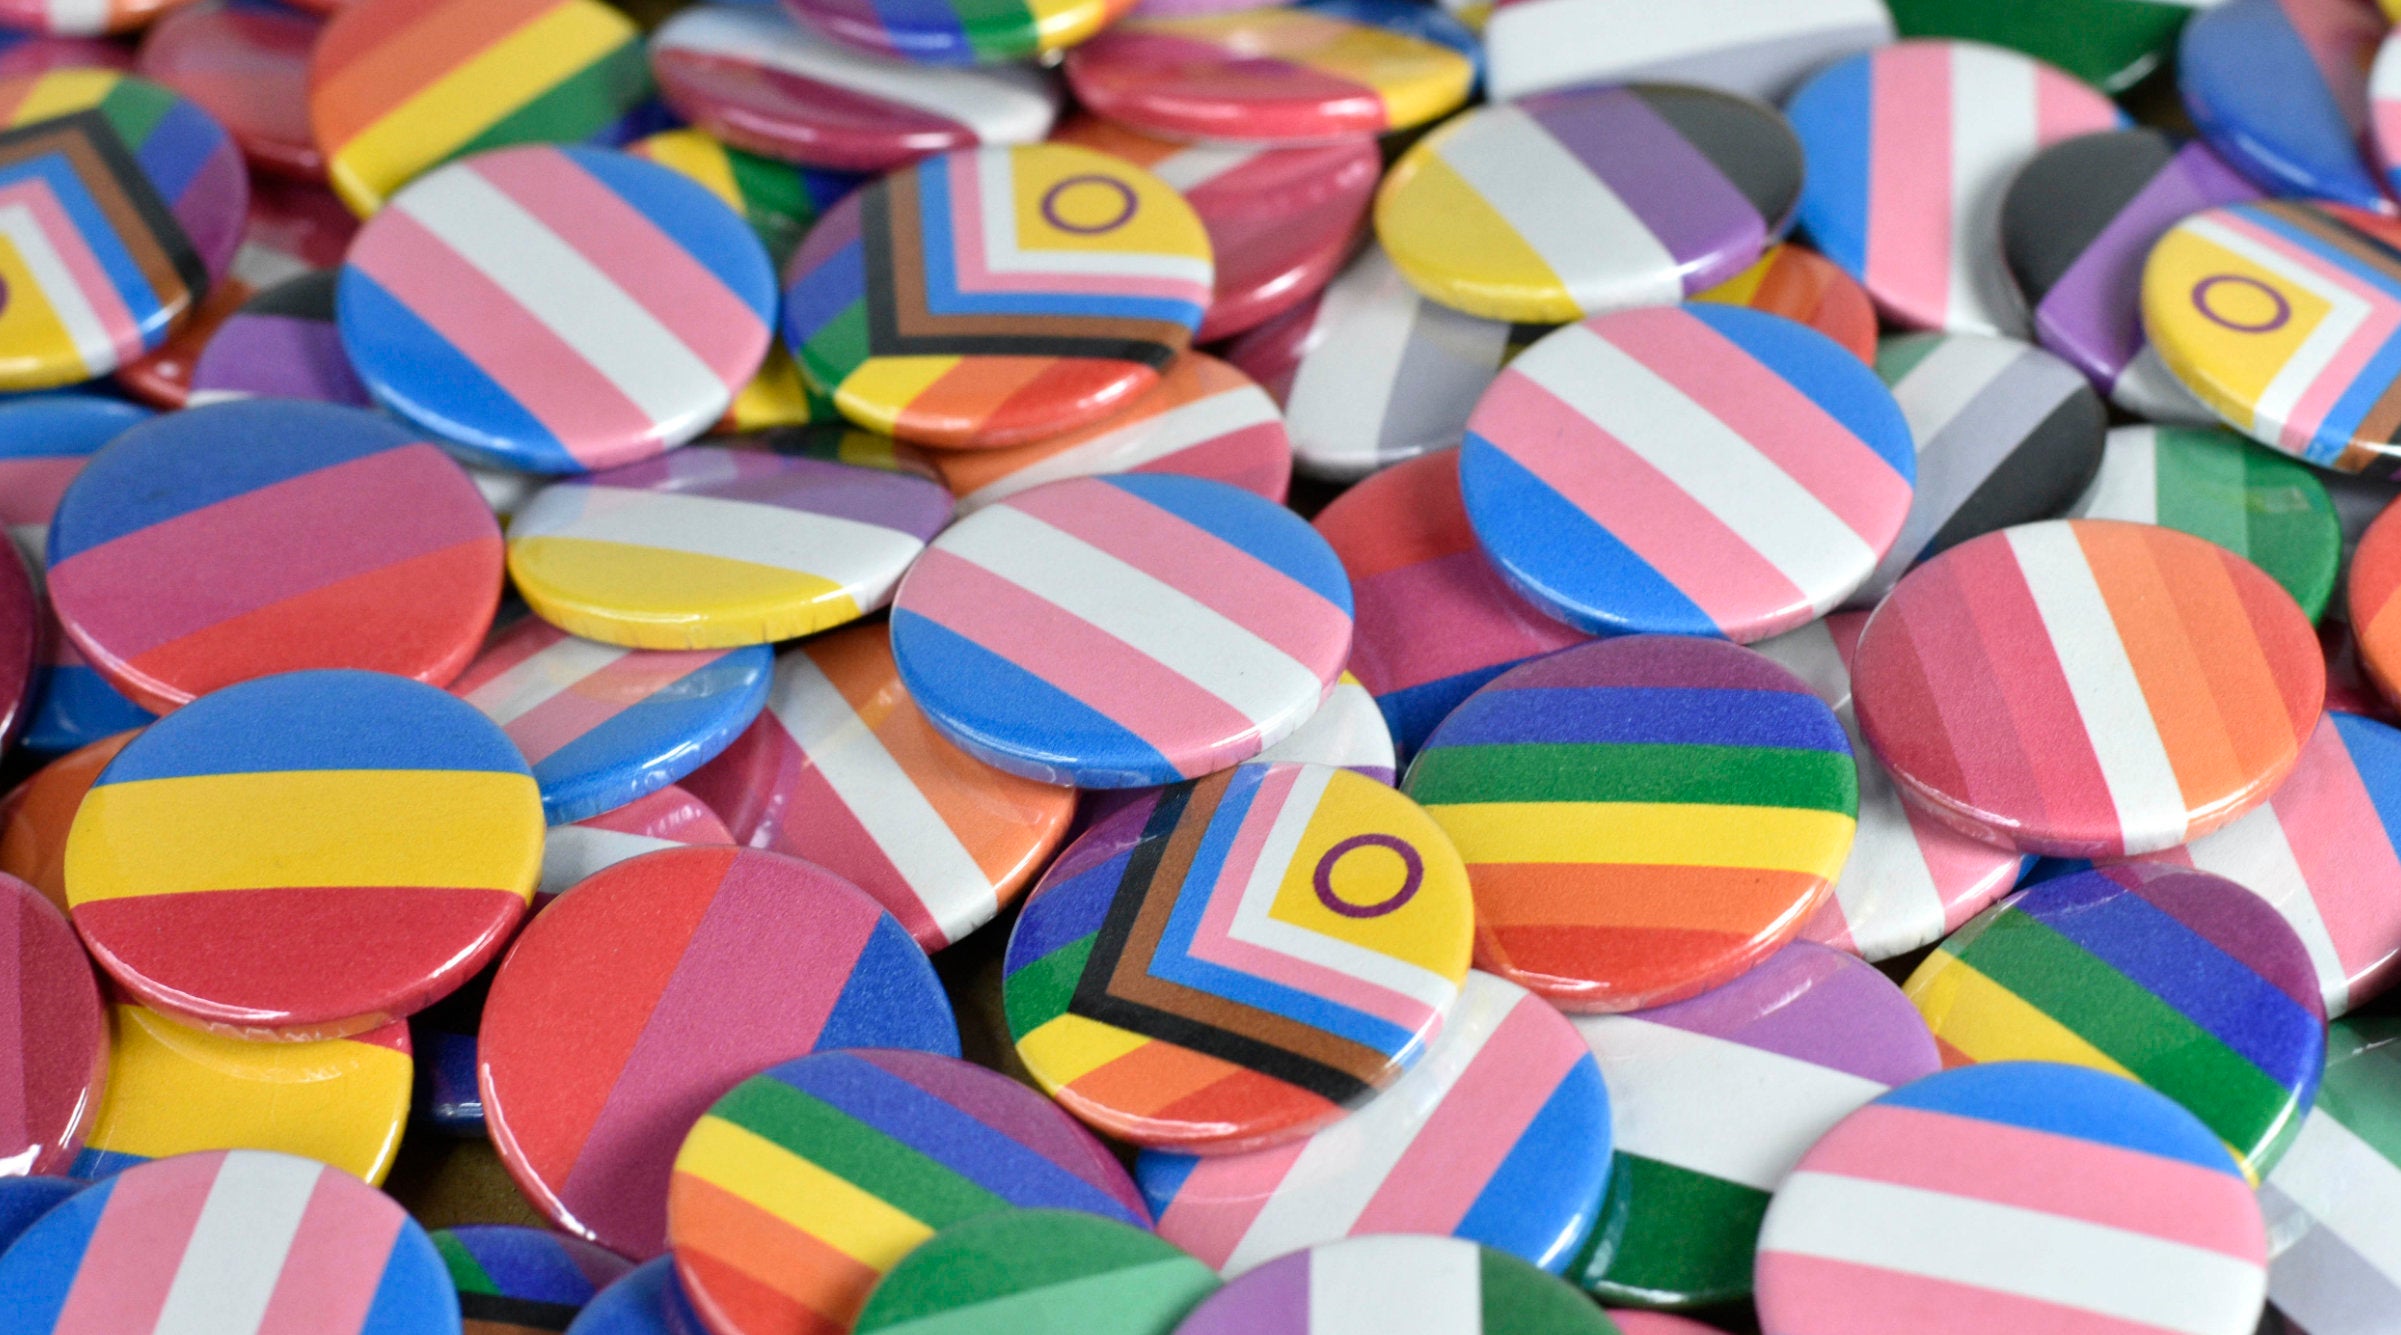 A large pile of small circular pin badges featuring a range of pride flags including progress pride, rainbow, trans, non-binary, asexual, bisexual, pansexual, lesbian and aromantic.